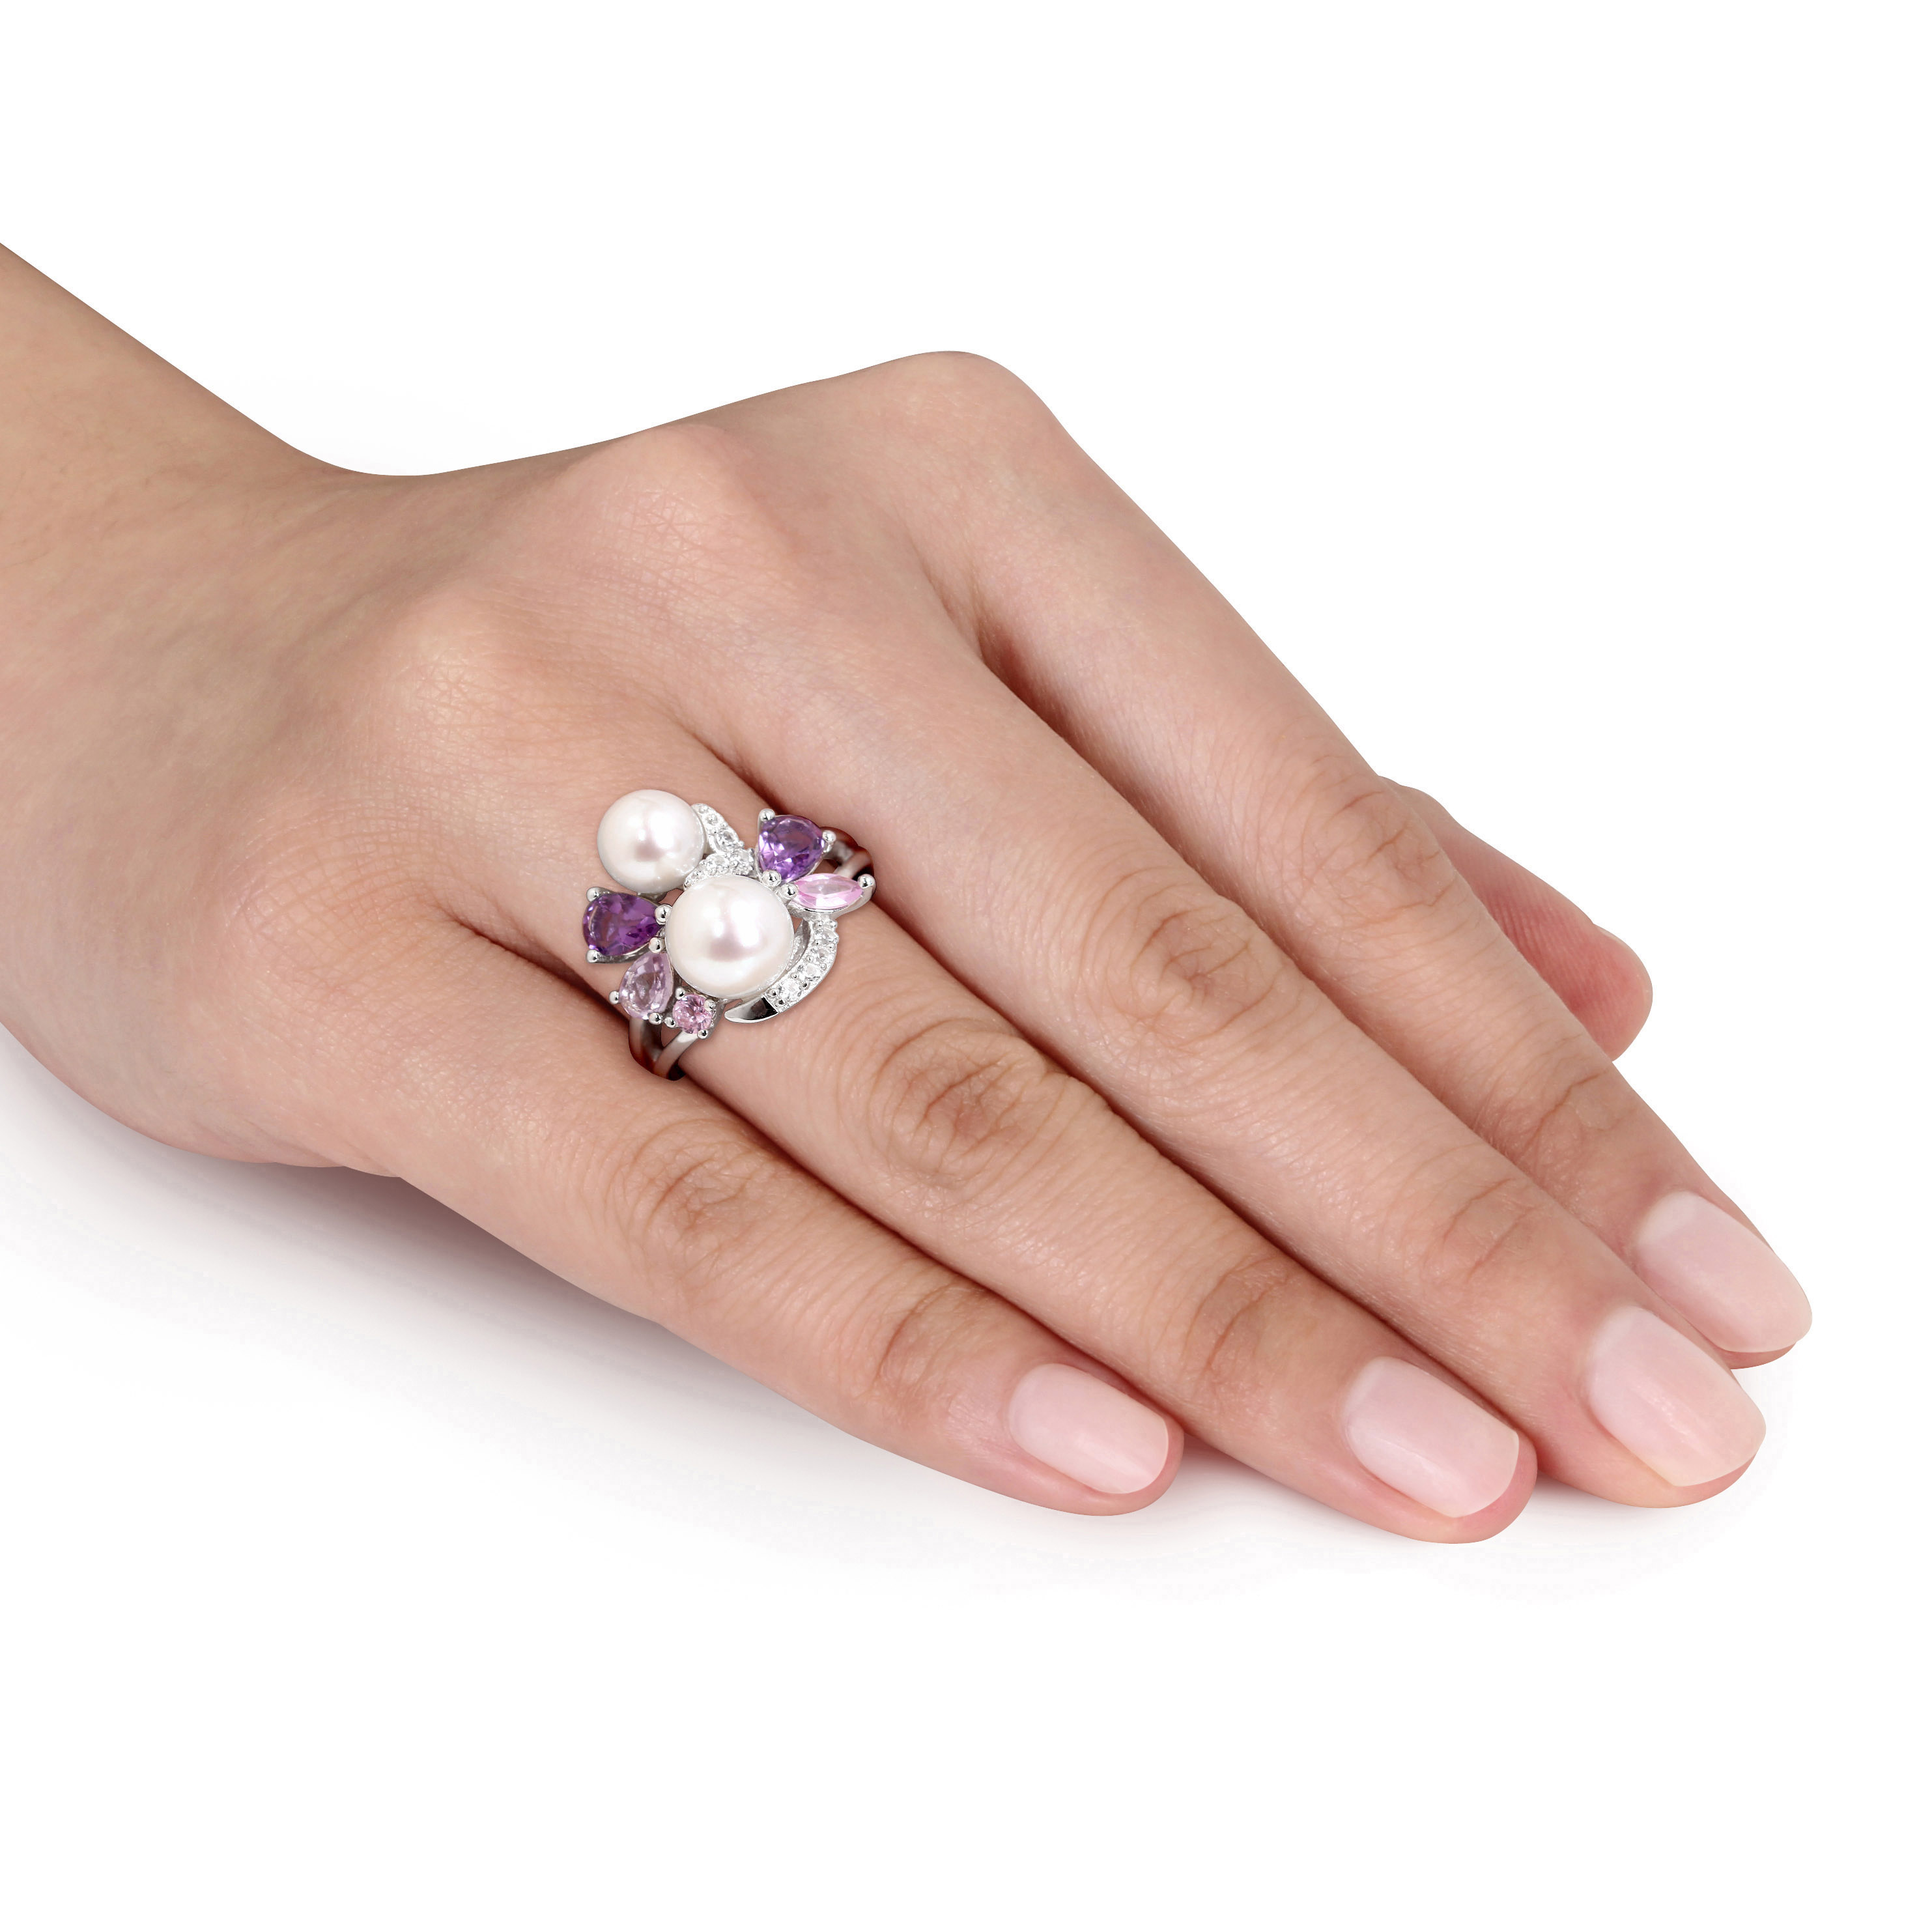 White Cultured Freshwater Pearl Ring with Amethyst, Created Pink and White Sapphire, and Rose de France in Sterling Silver